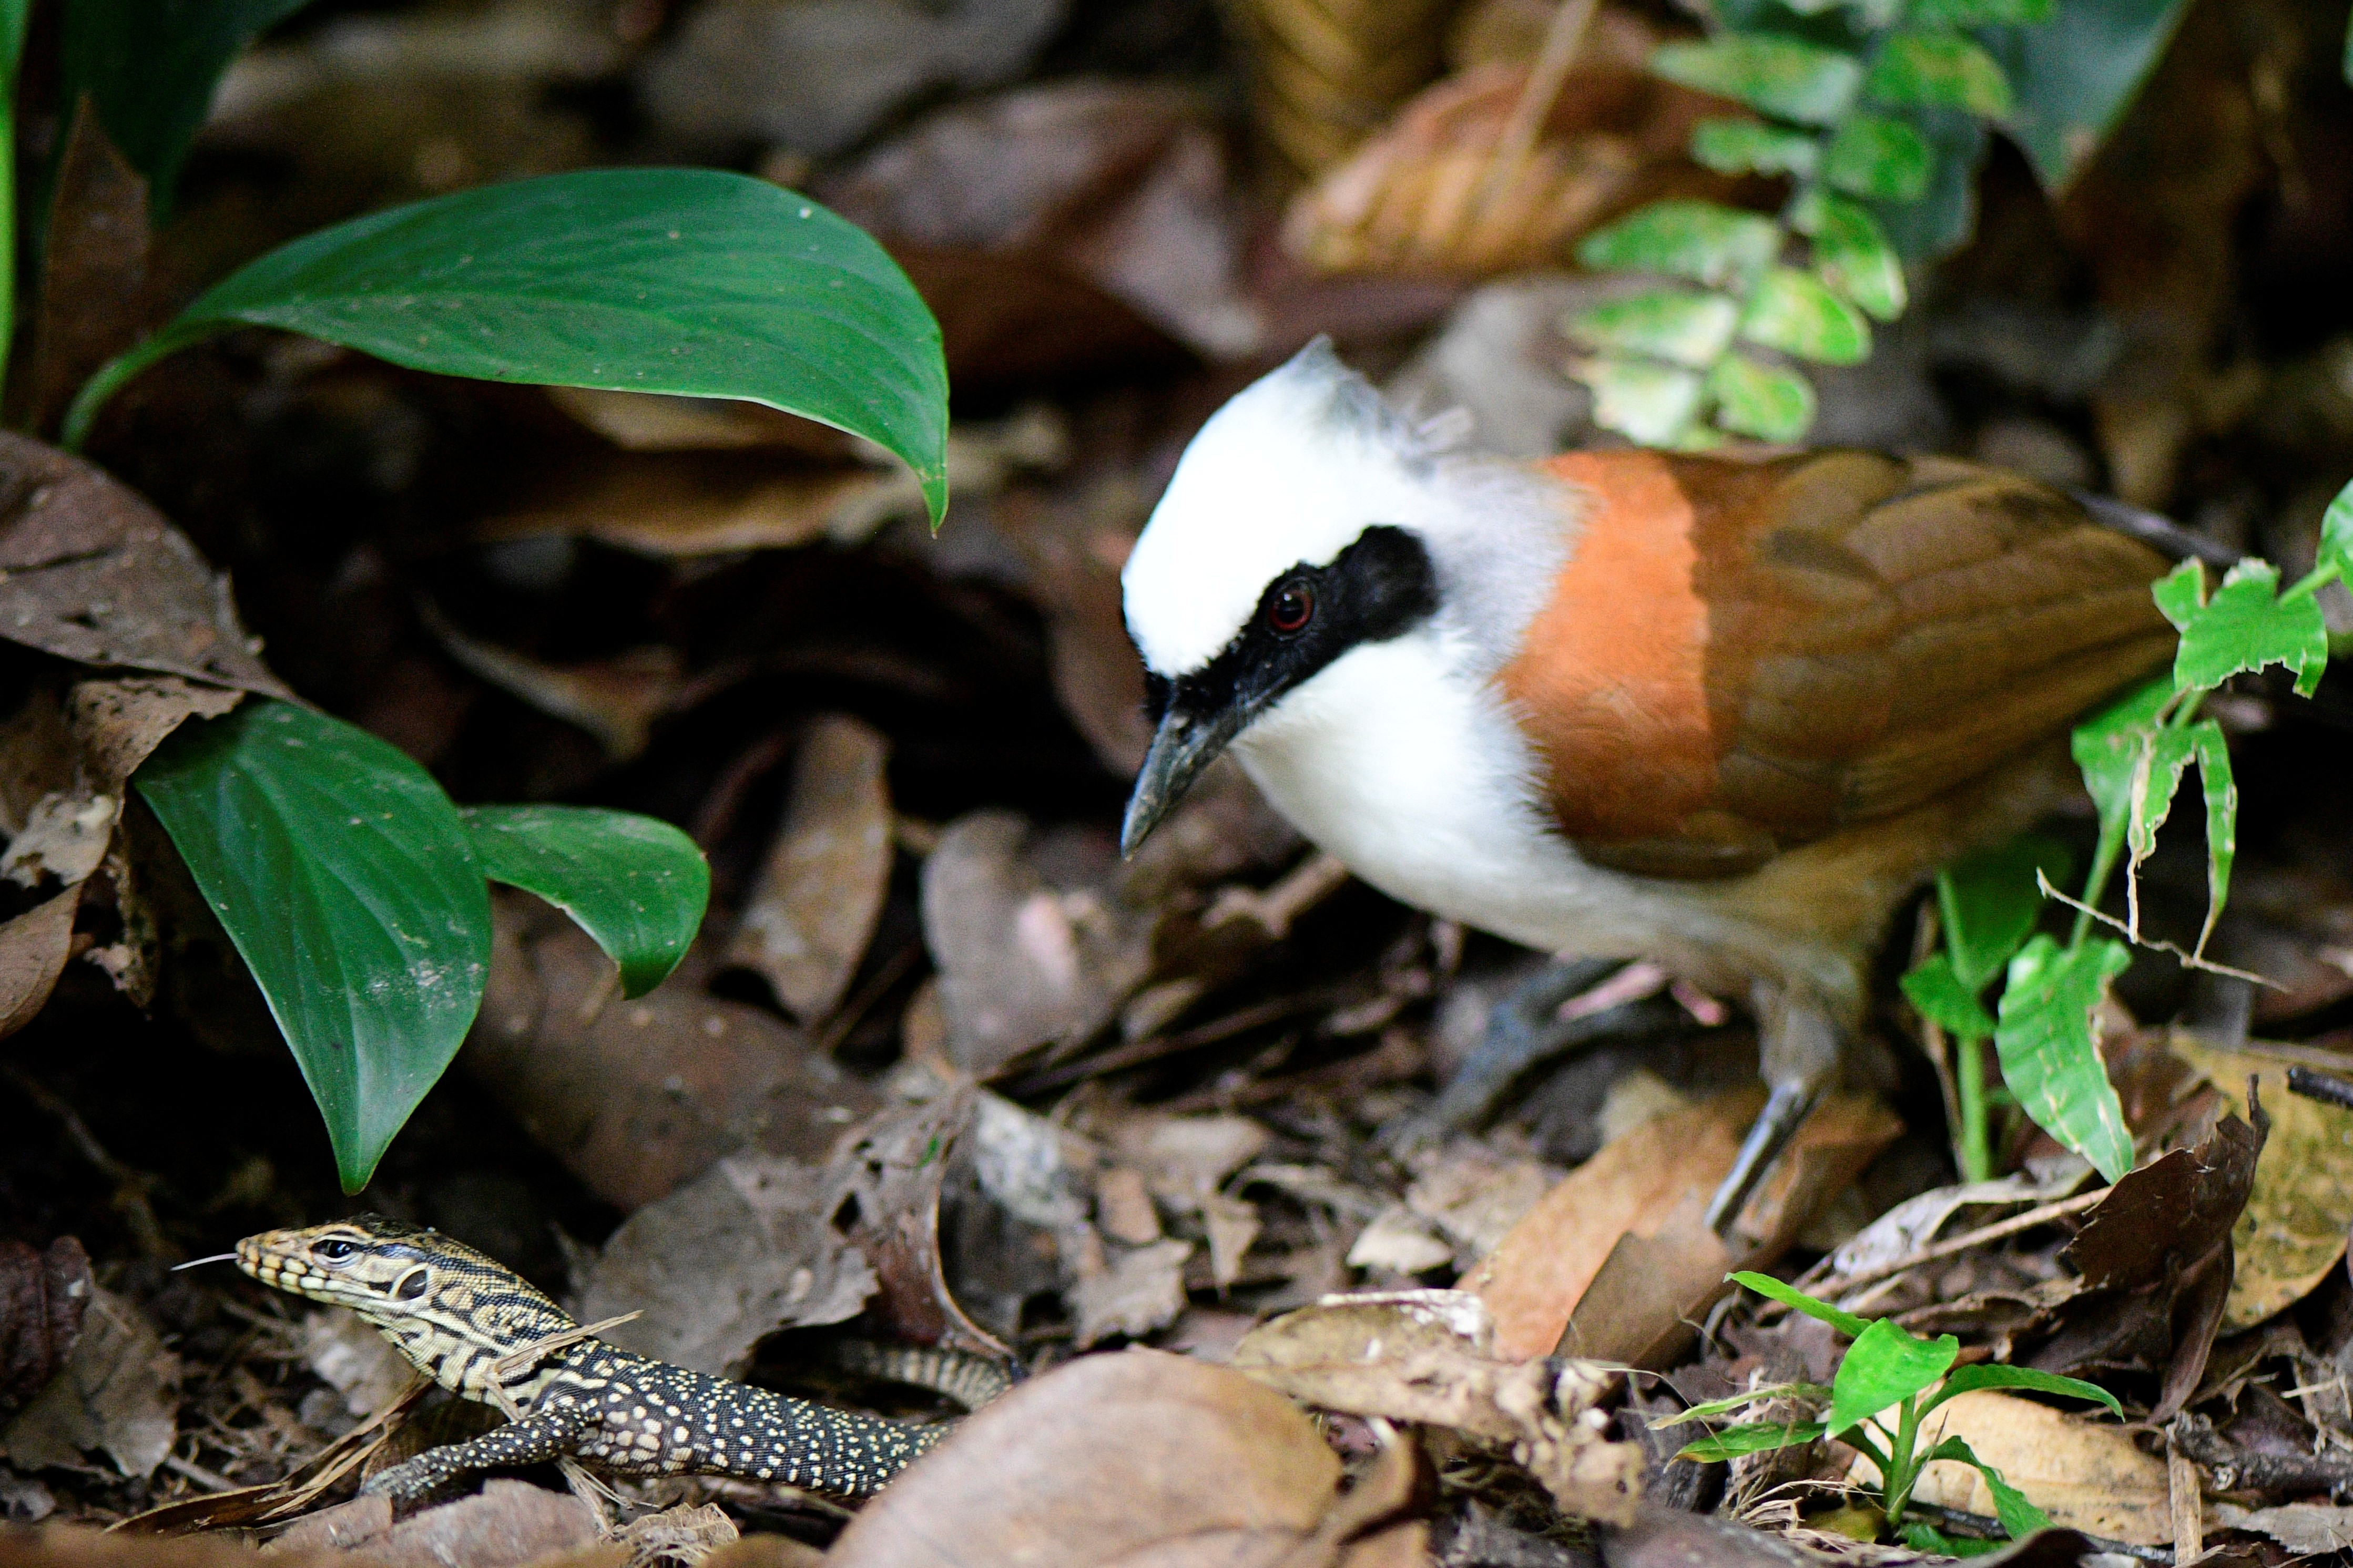 White-crested laughing thrush